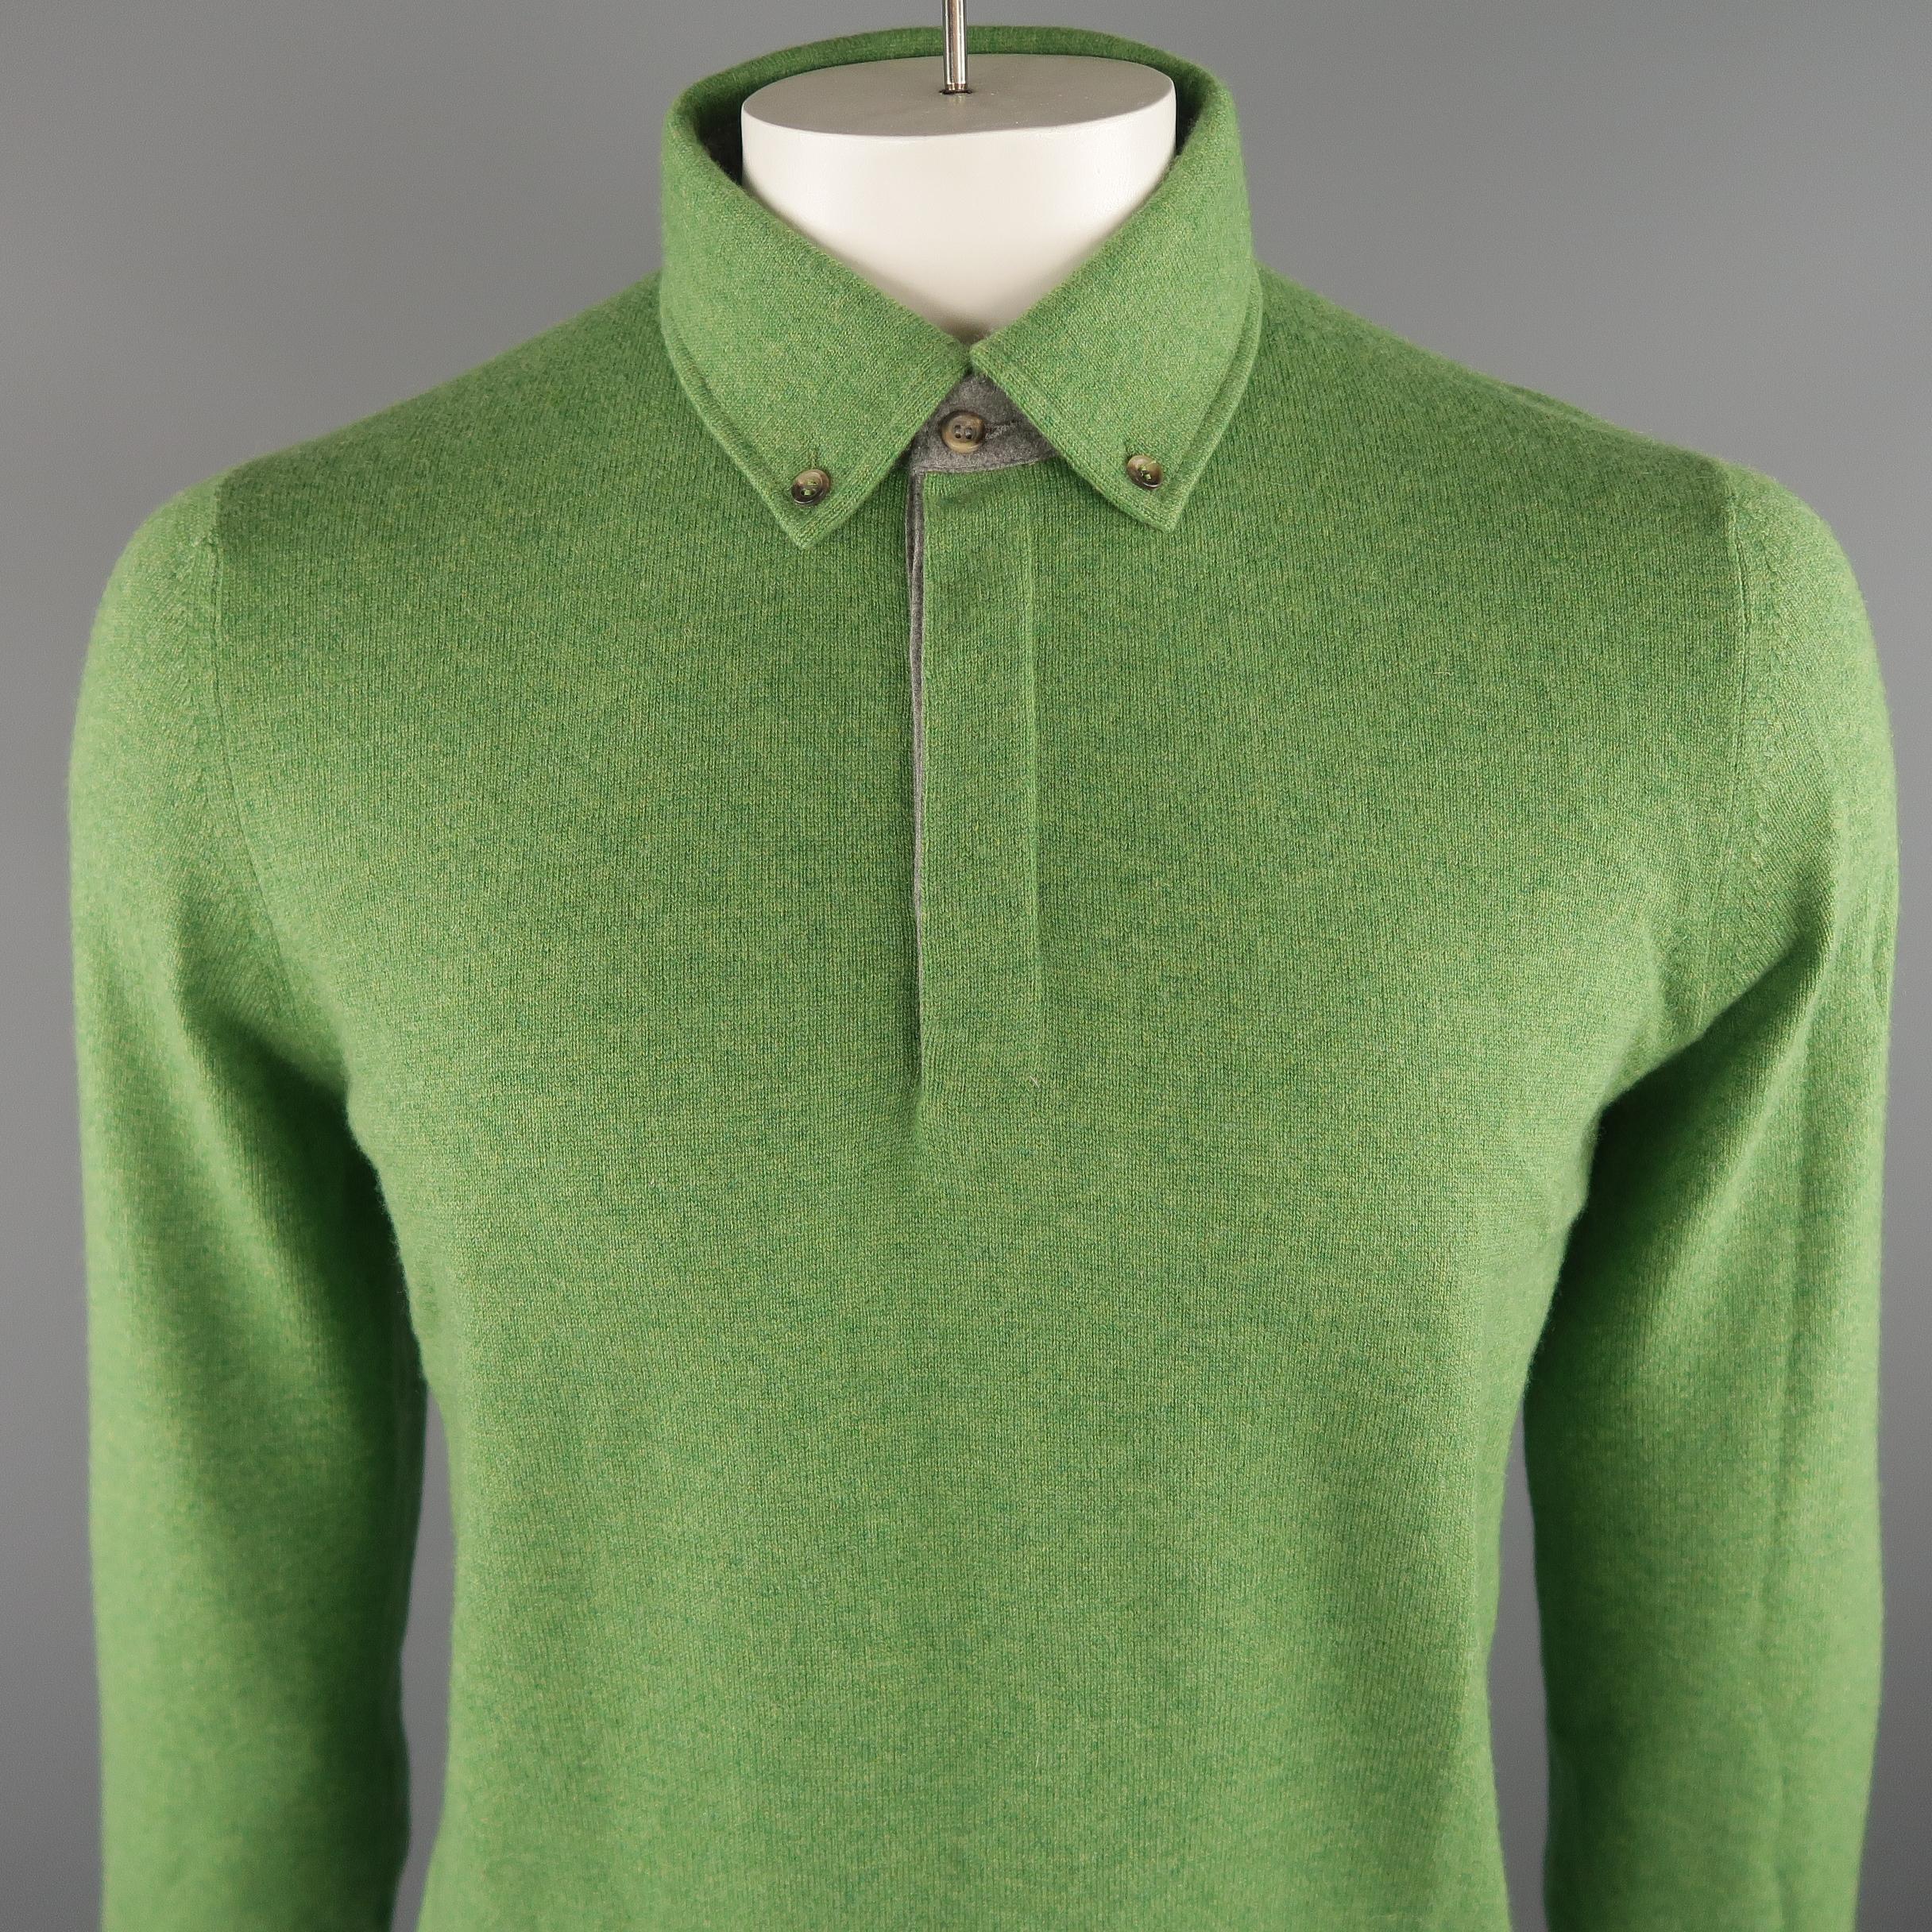 BRUNELLO CUCINELLI pullover comes in green tone knitted cashmere, with button collar, ribbed cuffs and waistband. Made in Italy.
 
New with Tags.
Marked: 52 IT
 
Measurements:
 
Shoulder: 17 in.
Chest: 46 in.
Sleeve: 26 in.
Length: 27 in.